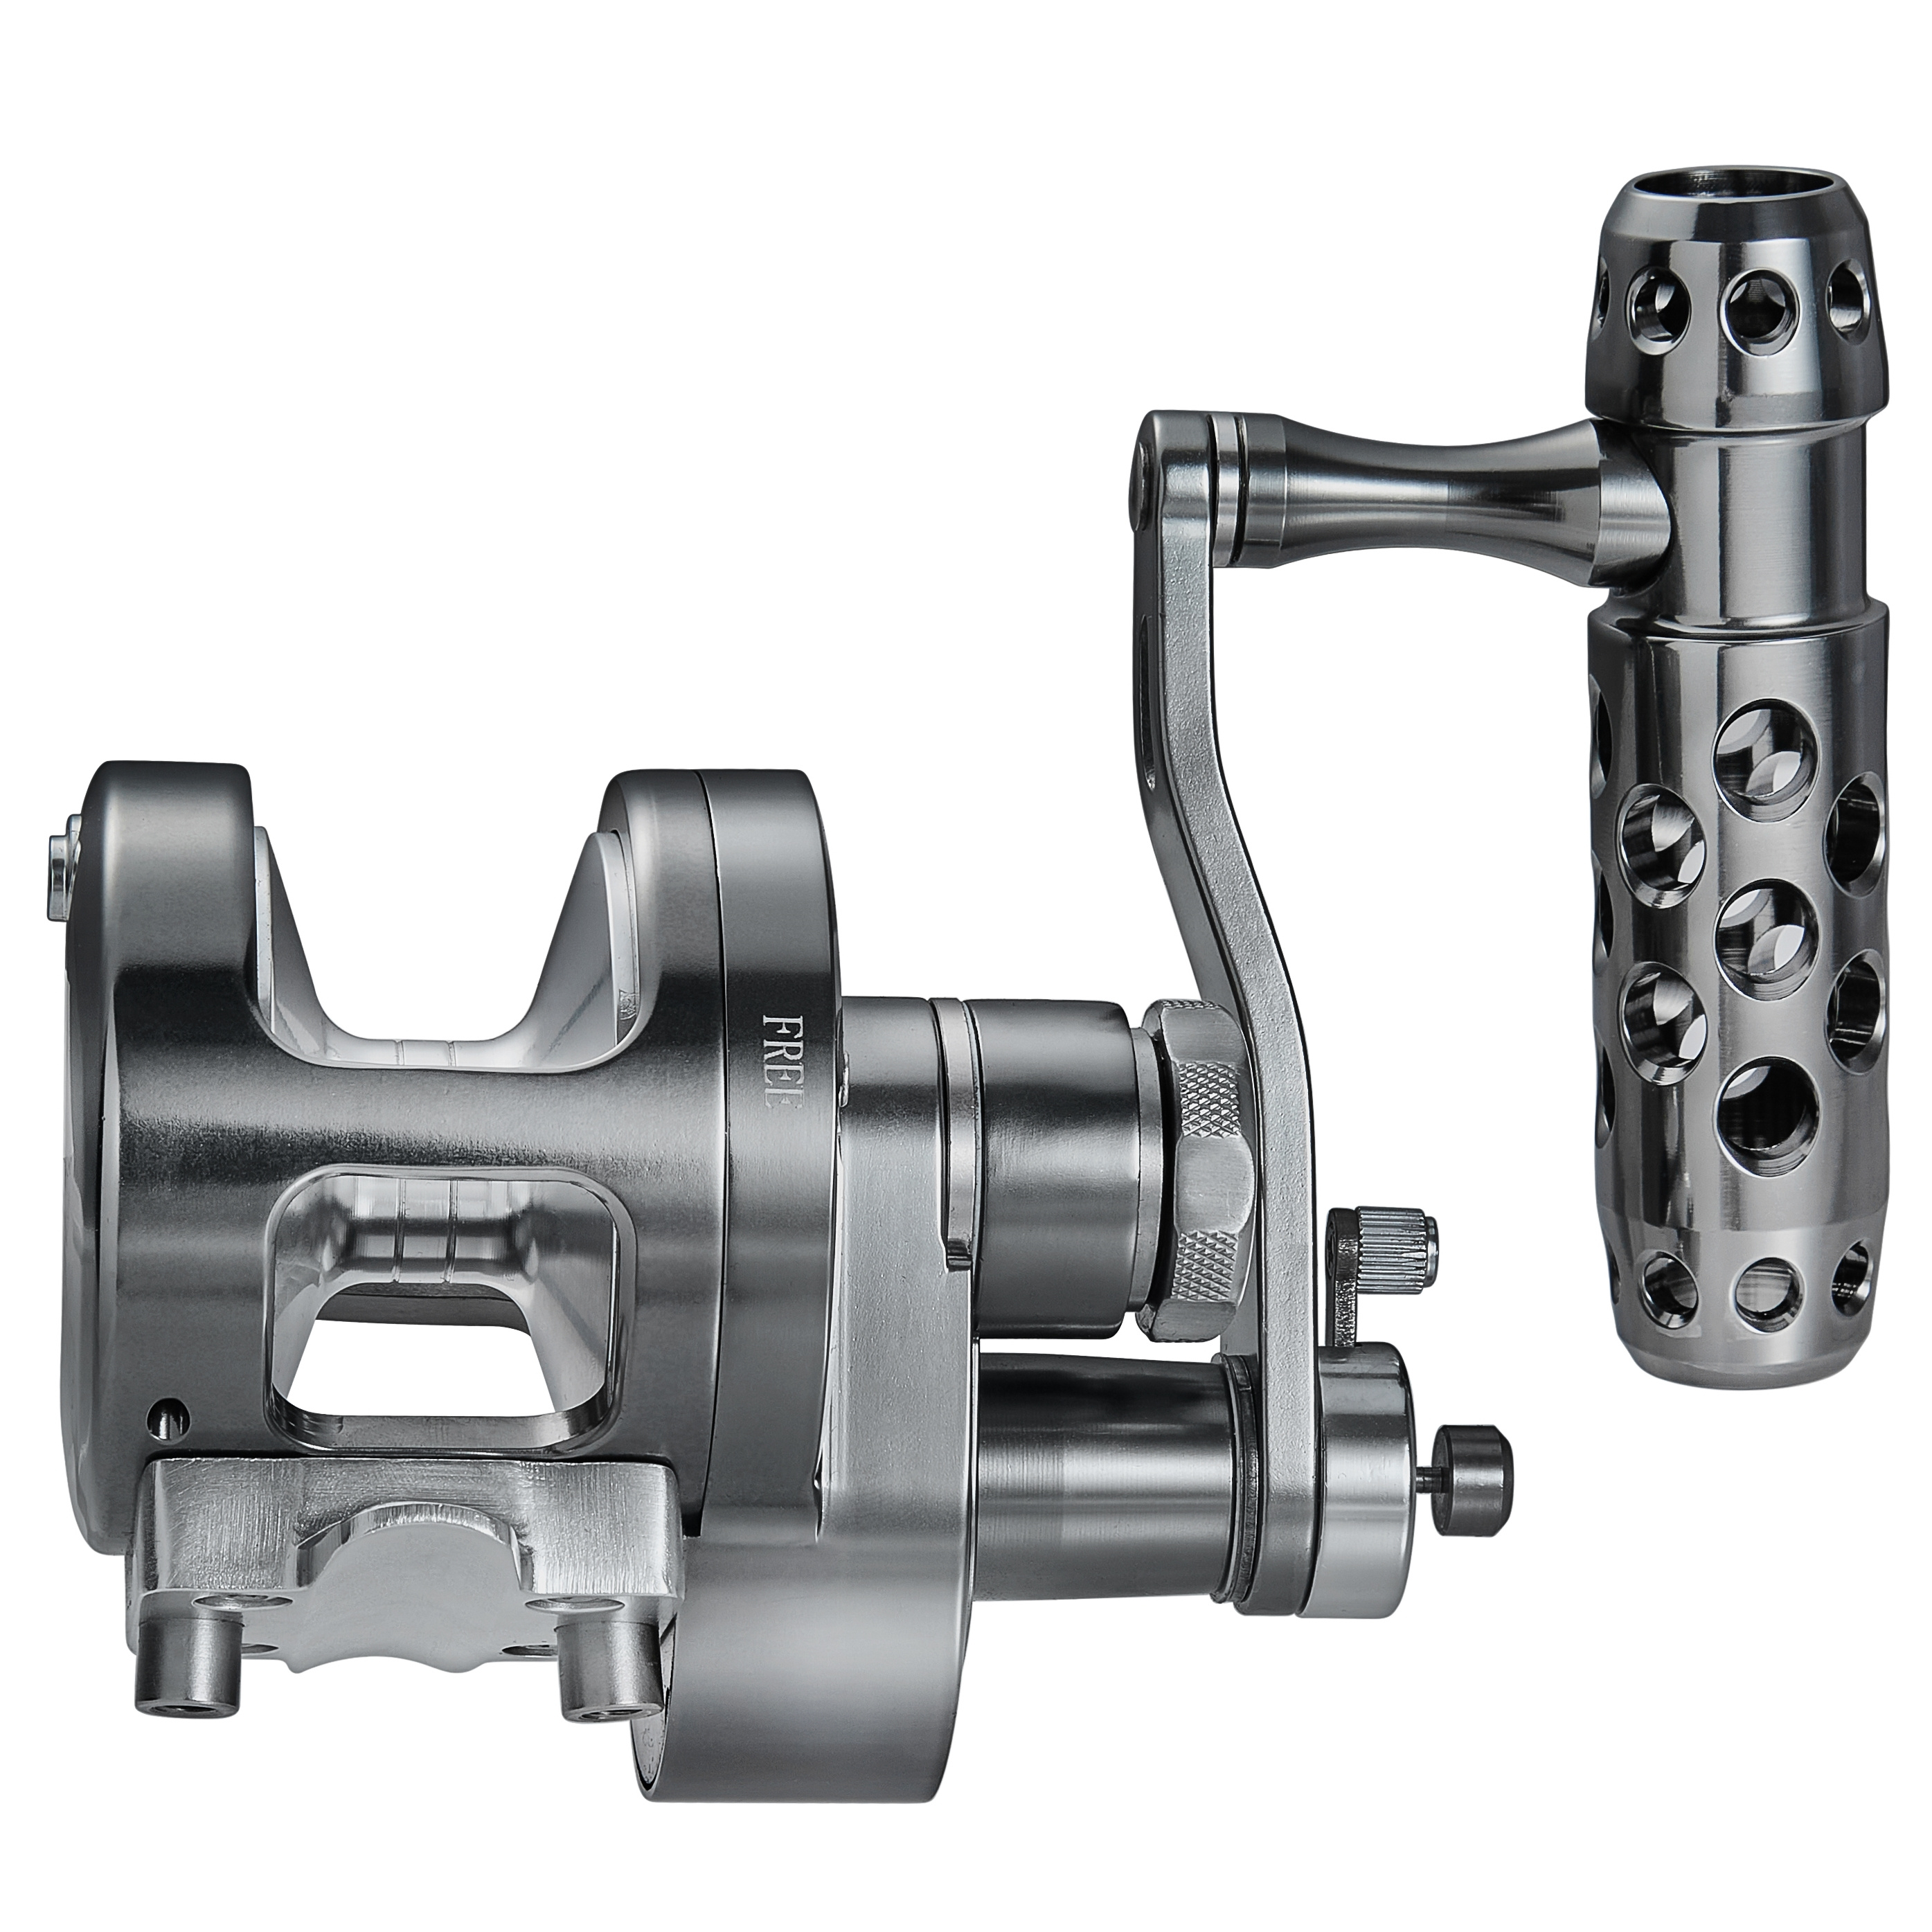 CNC Machined Aluminum Baitcasting Okuma Reels With Two Speed Lever Drag For  Ocean Boats 23LB/14KG Overhead Jigging Tool 230619 From Bian06, $111.06